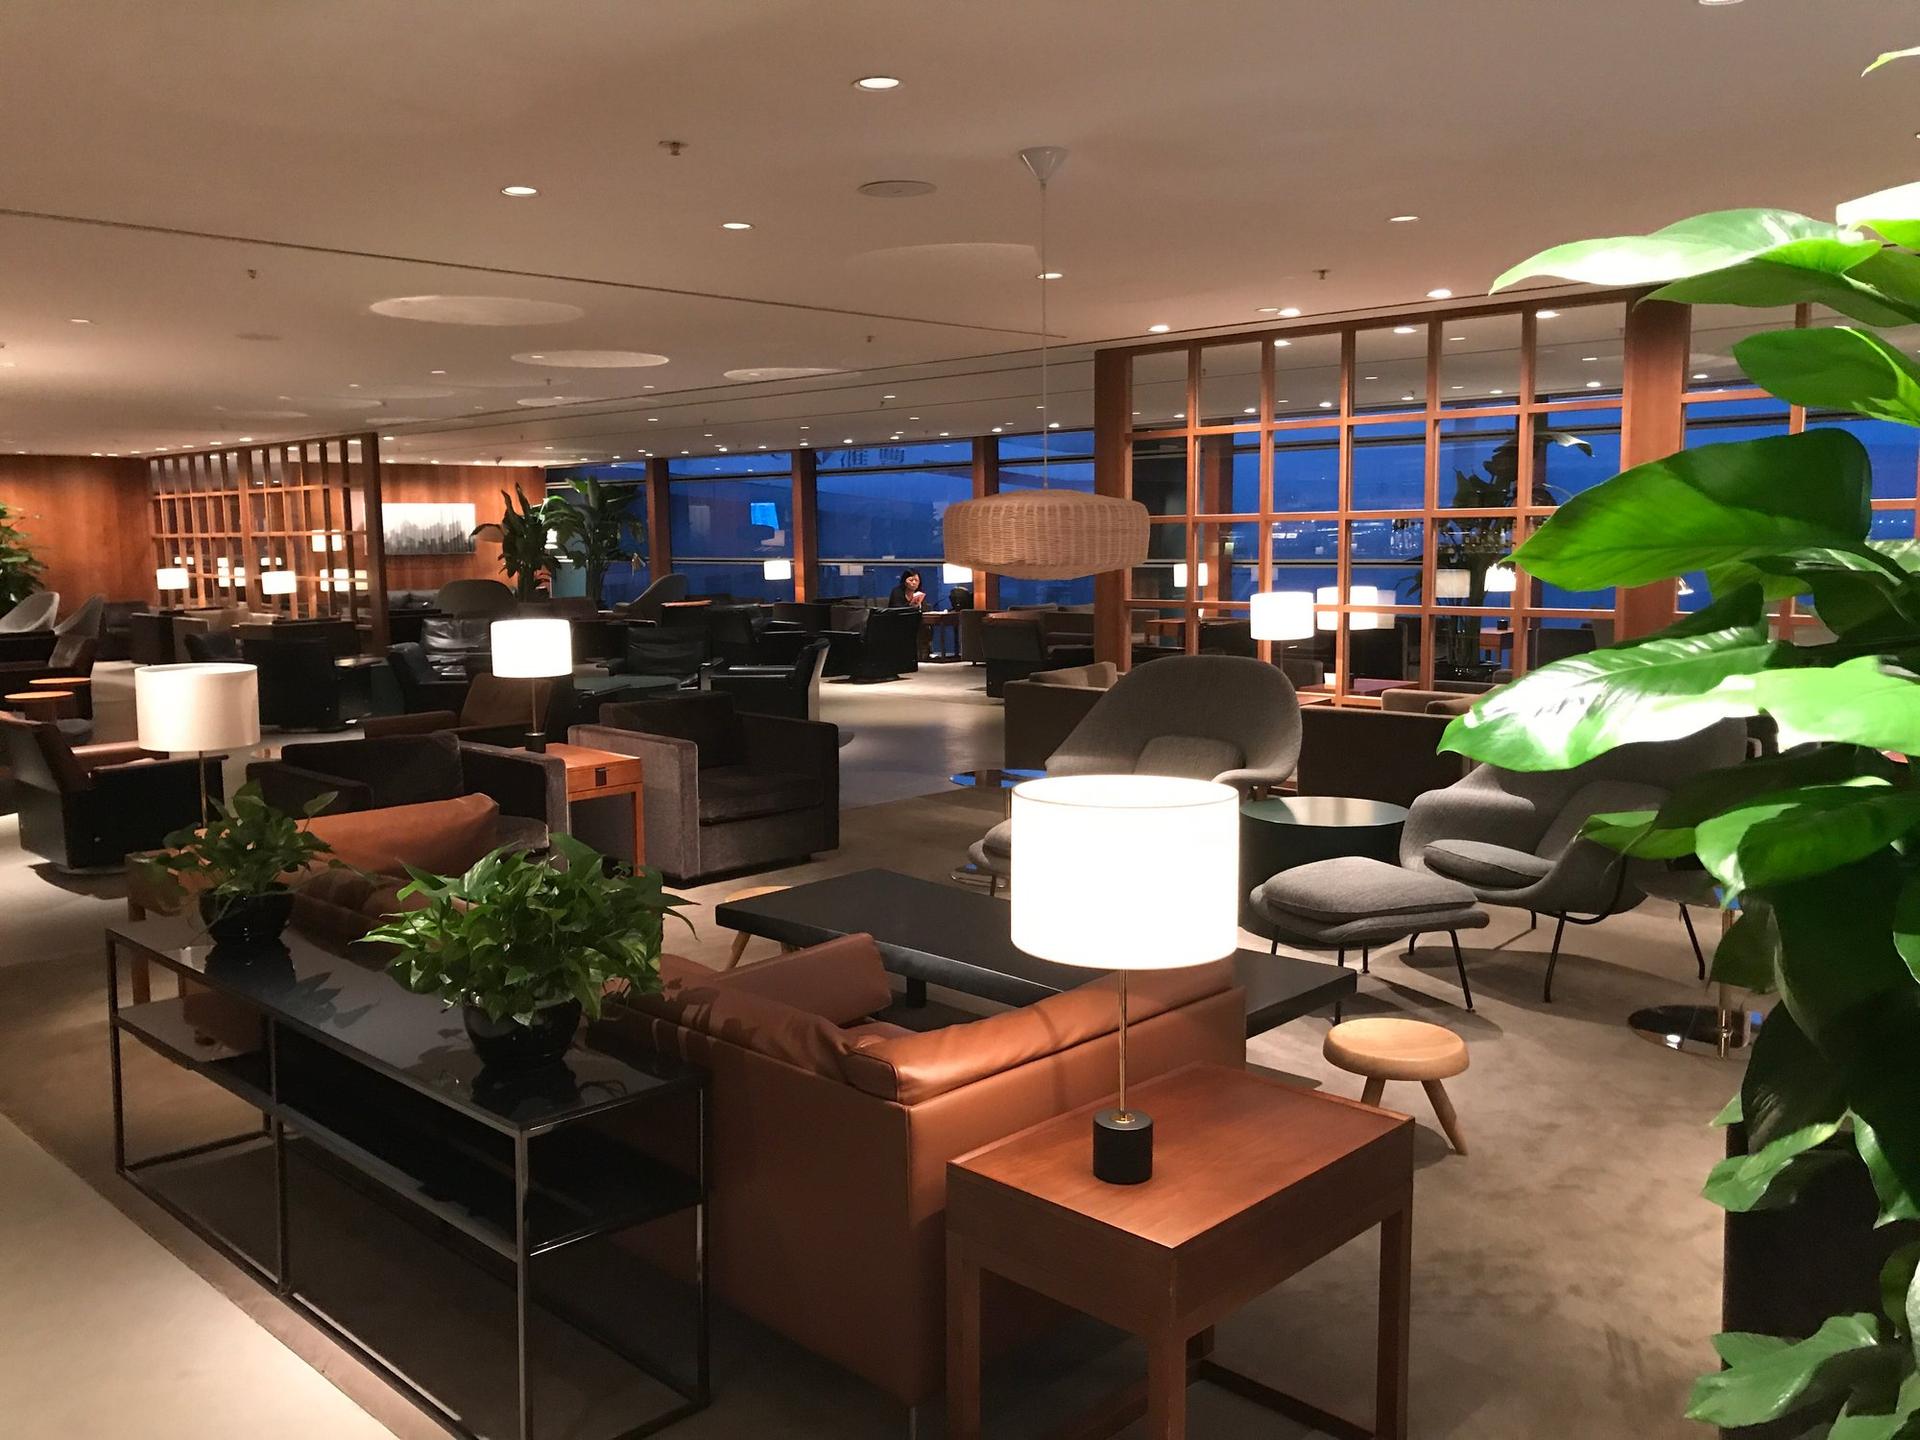 Cathay Pacific The Pier Business Class Lounge image 51 of 61